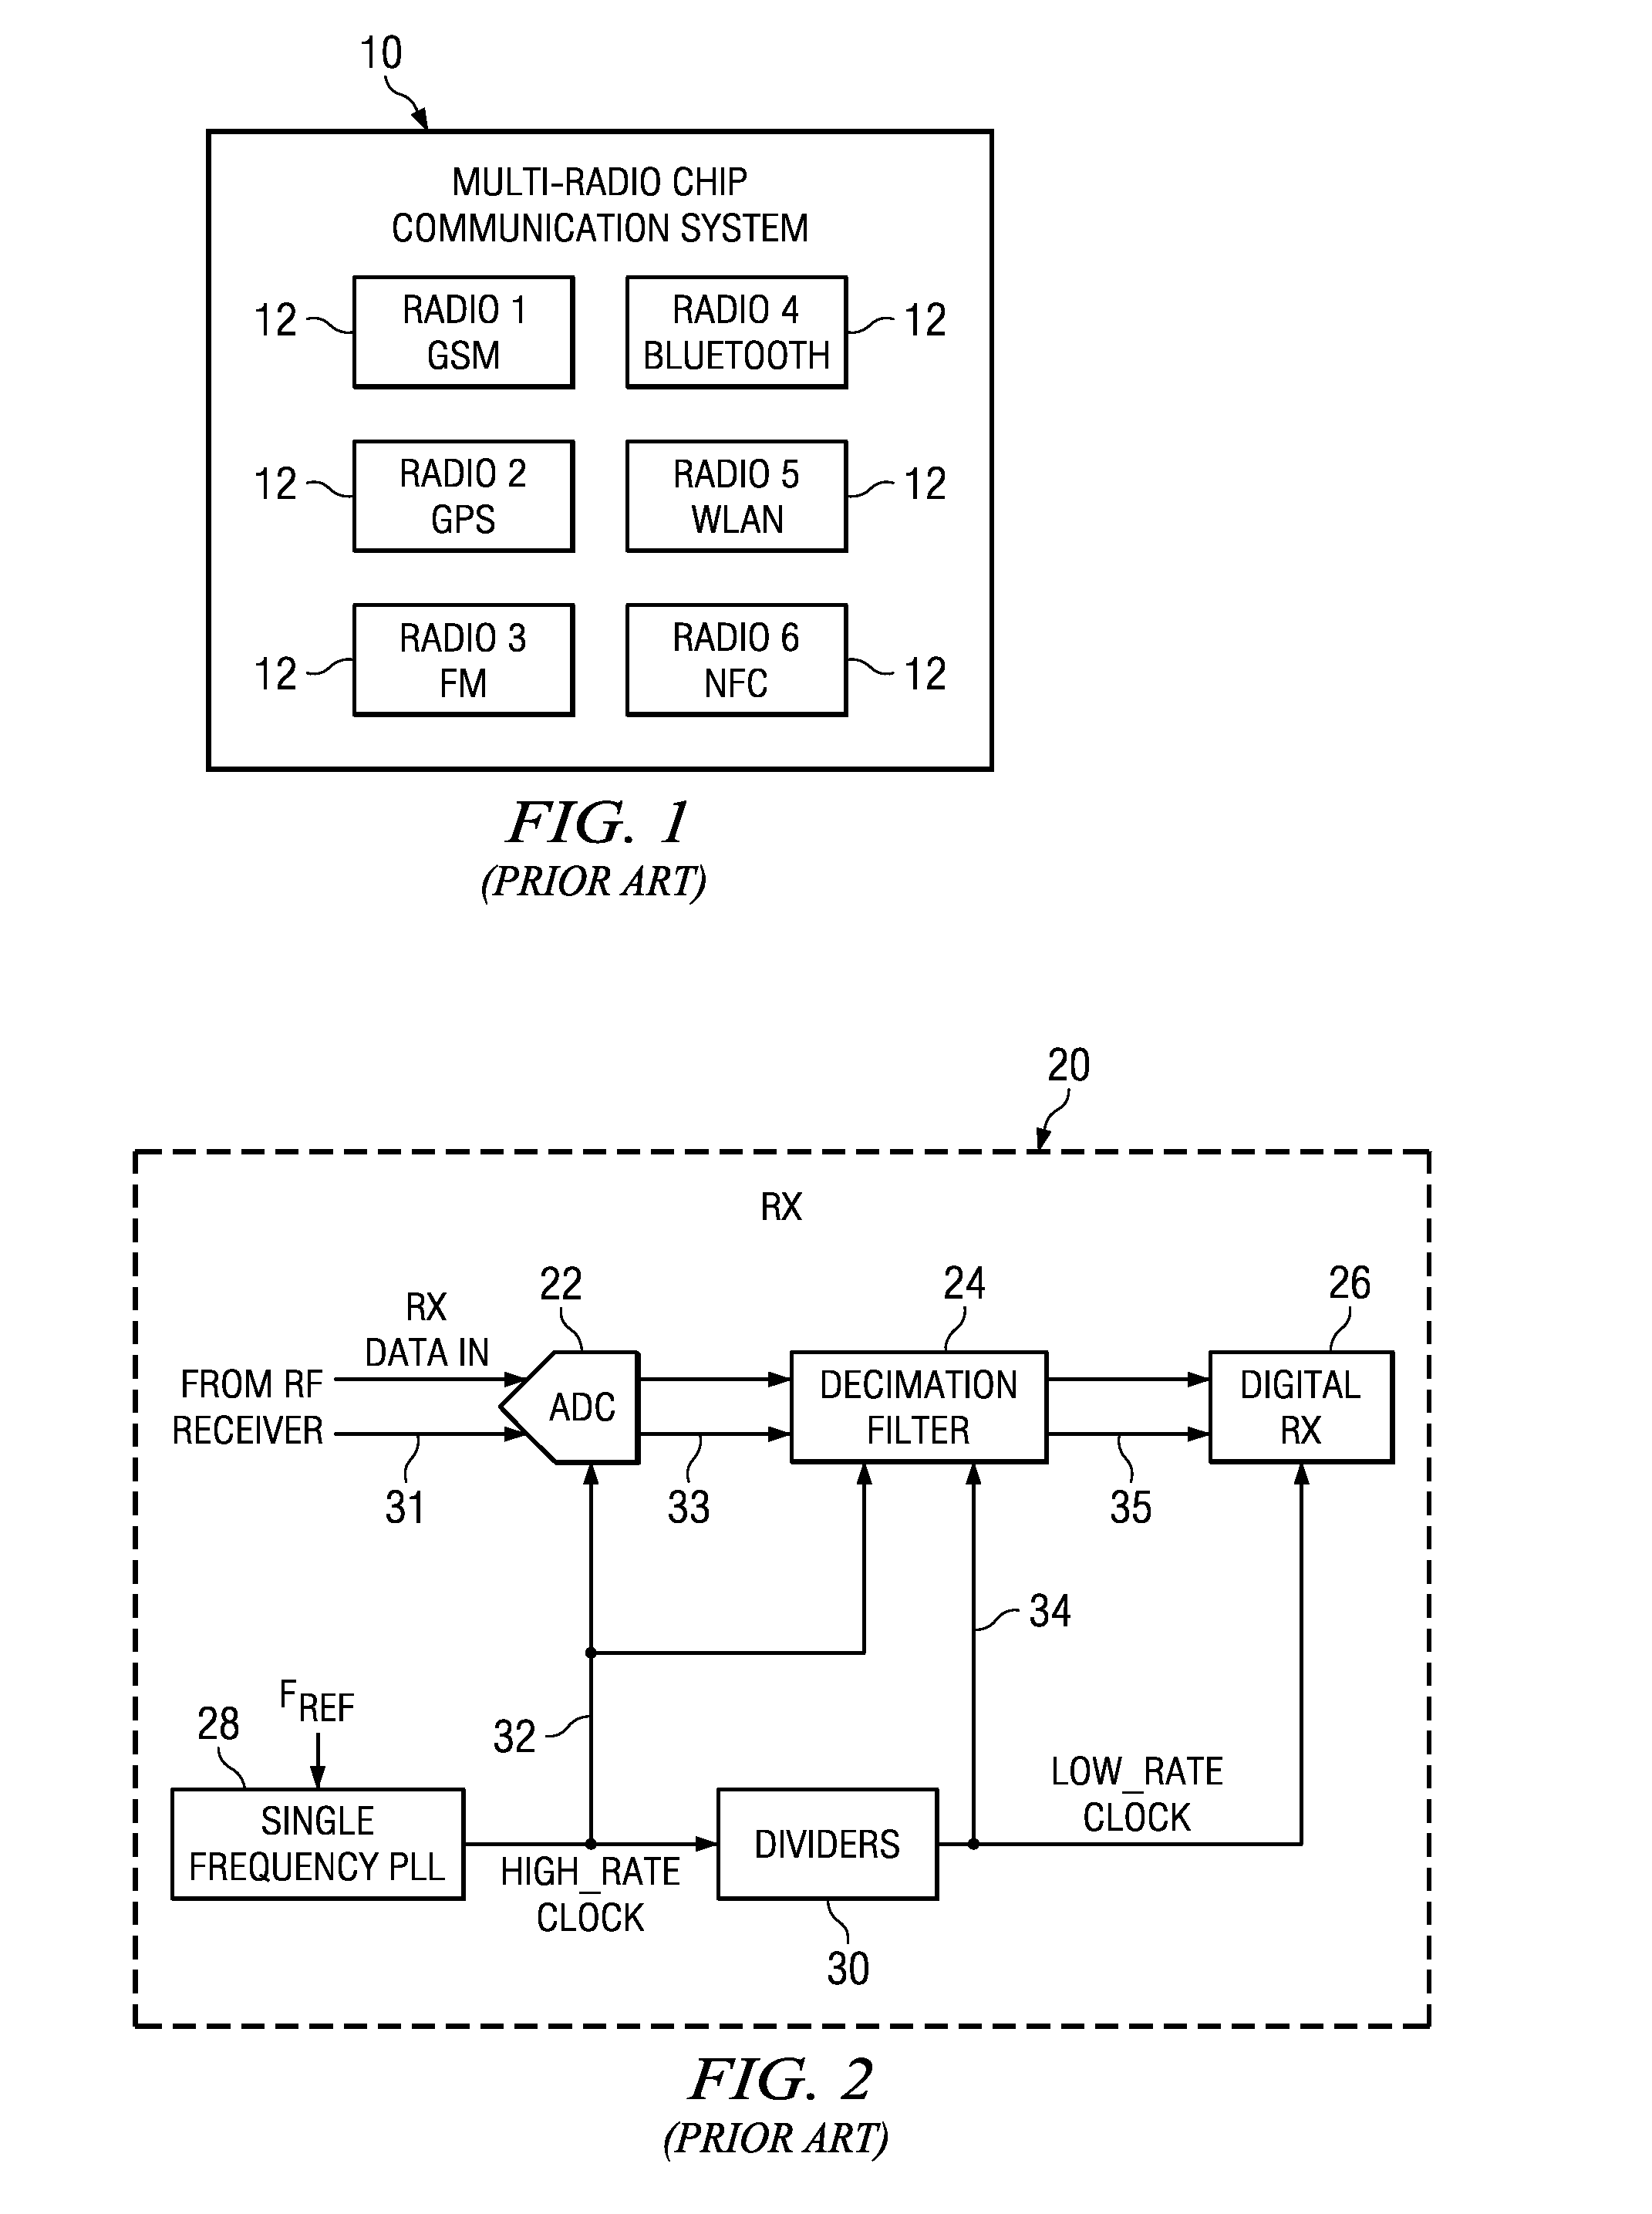 Distributed coexistence system for interference mitigation in a single chip radio or multi-radio communication device